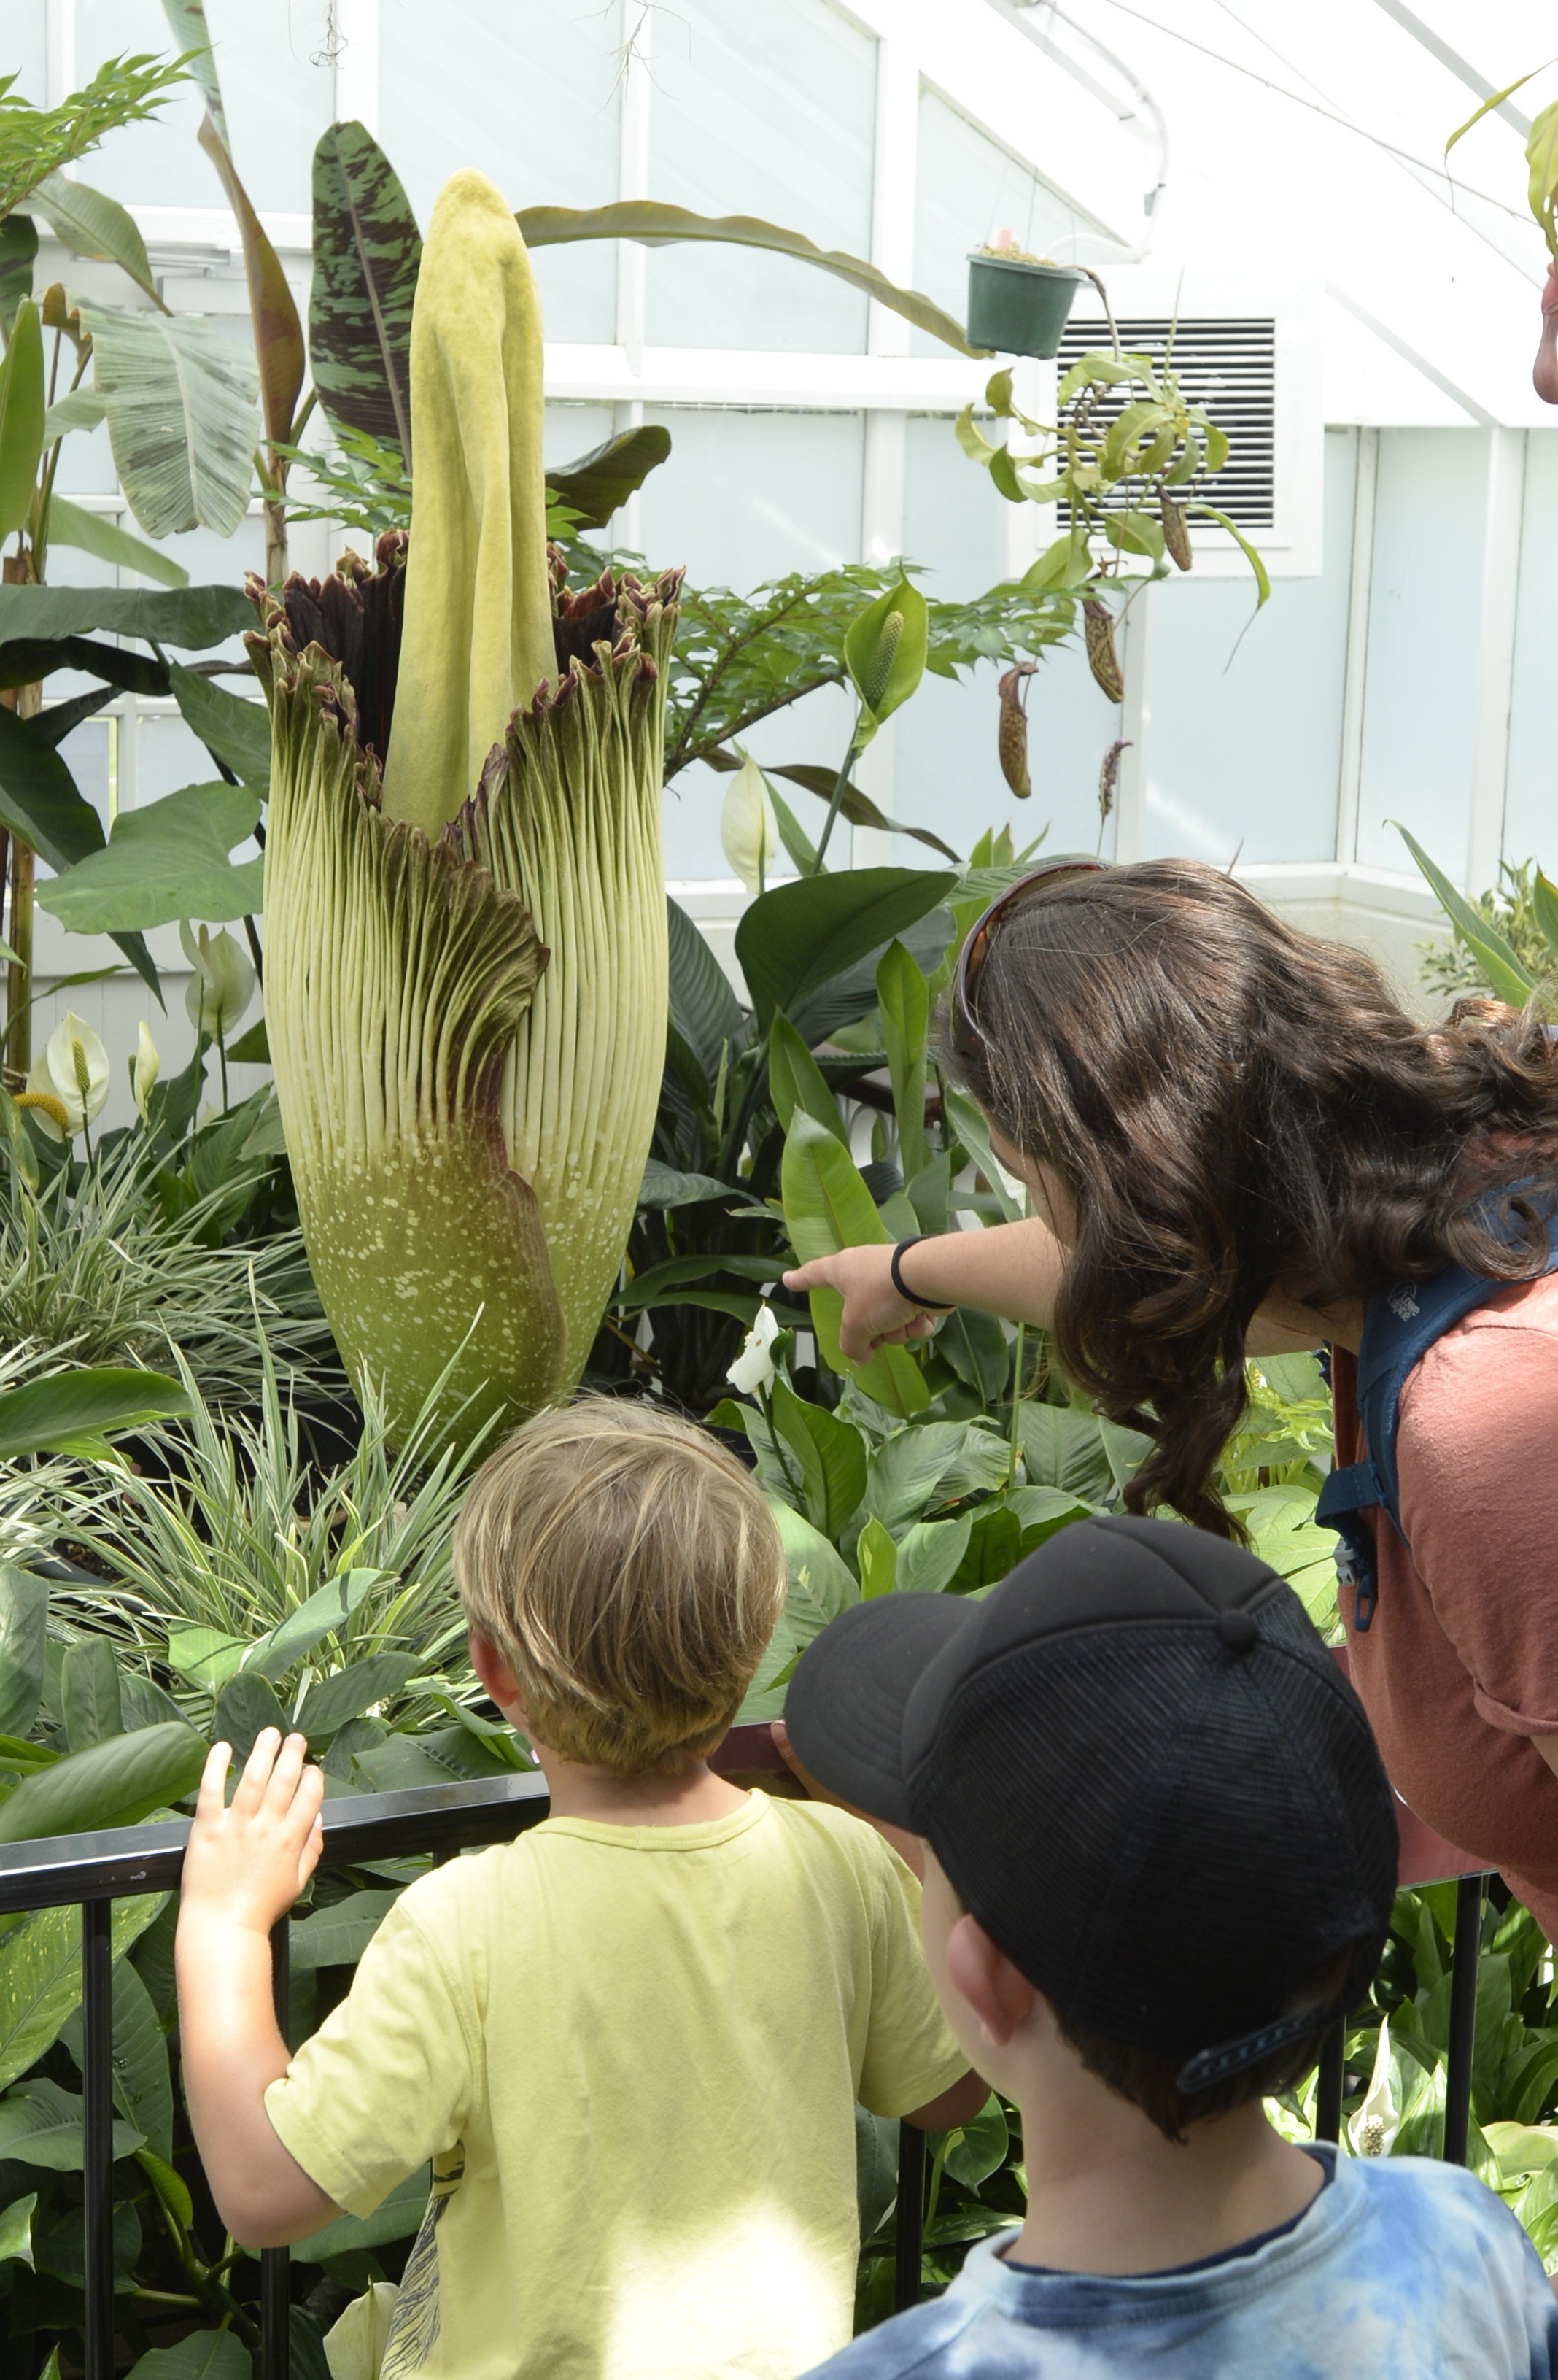 The corpse flower is expected to be fully open at the Dunedin Botanic Garden on Friday night. The...